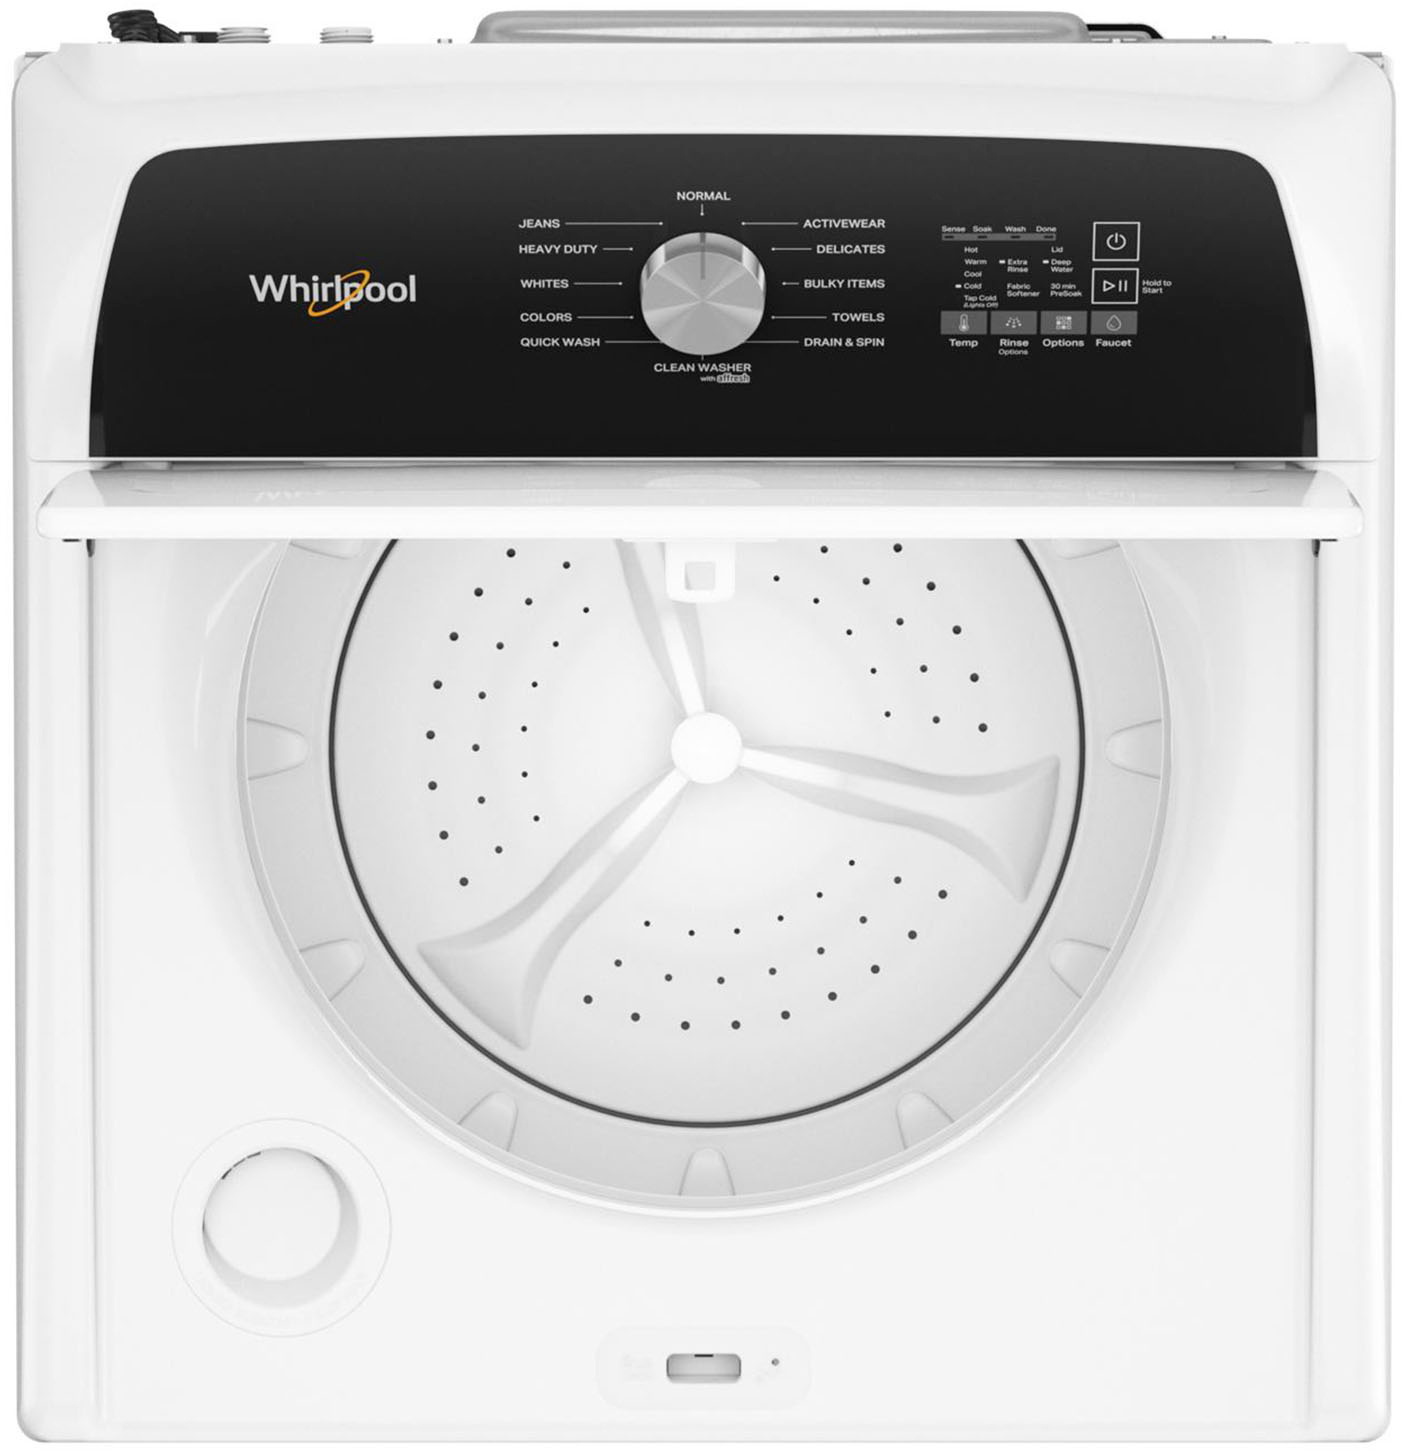 Whirlpool 4.6 Cu. Ft. Top Load Washer with Built-In Water Faucet White  WTW5010LW - Best Buy